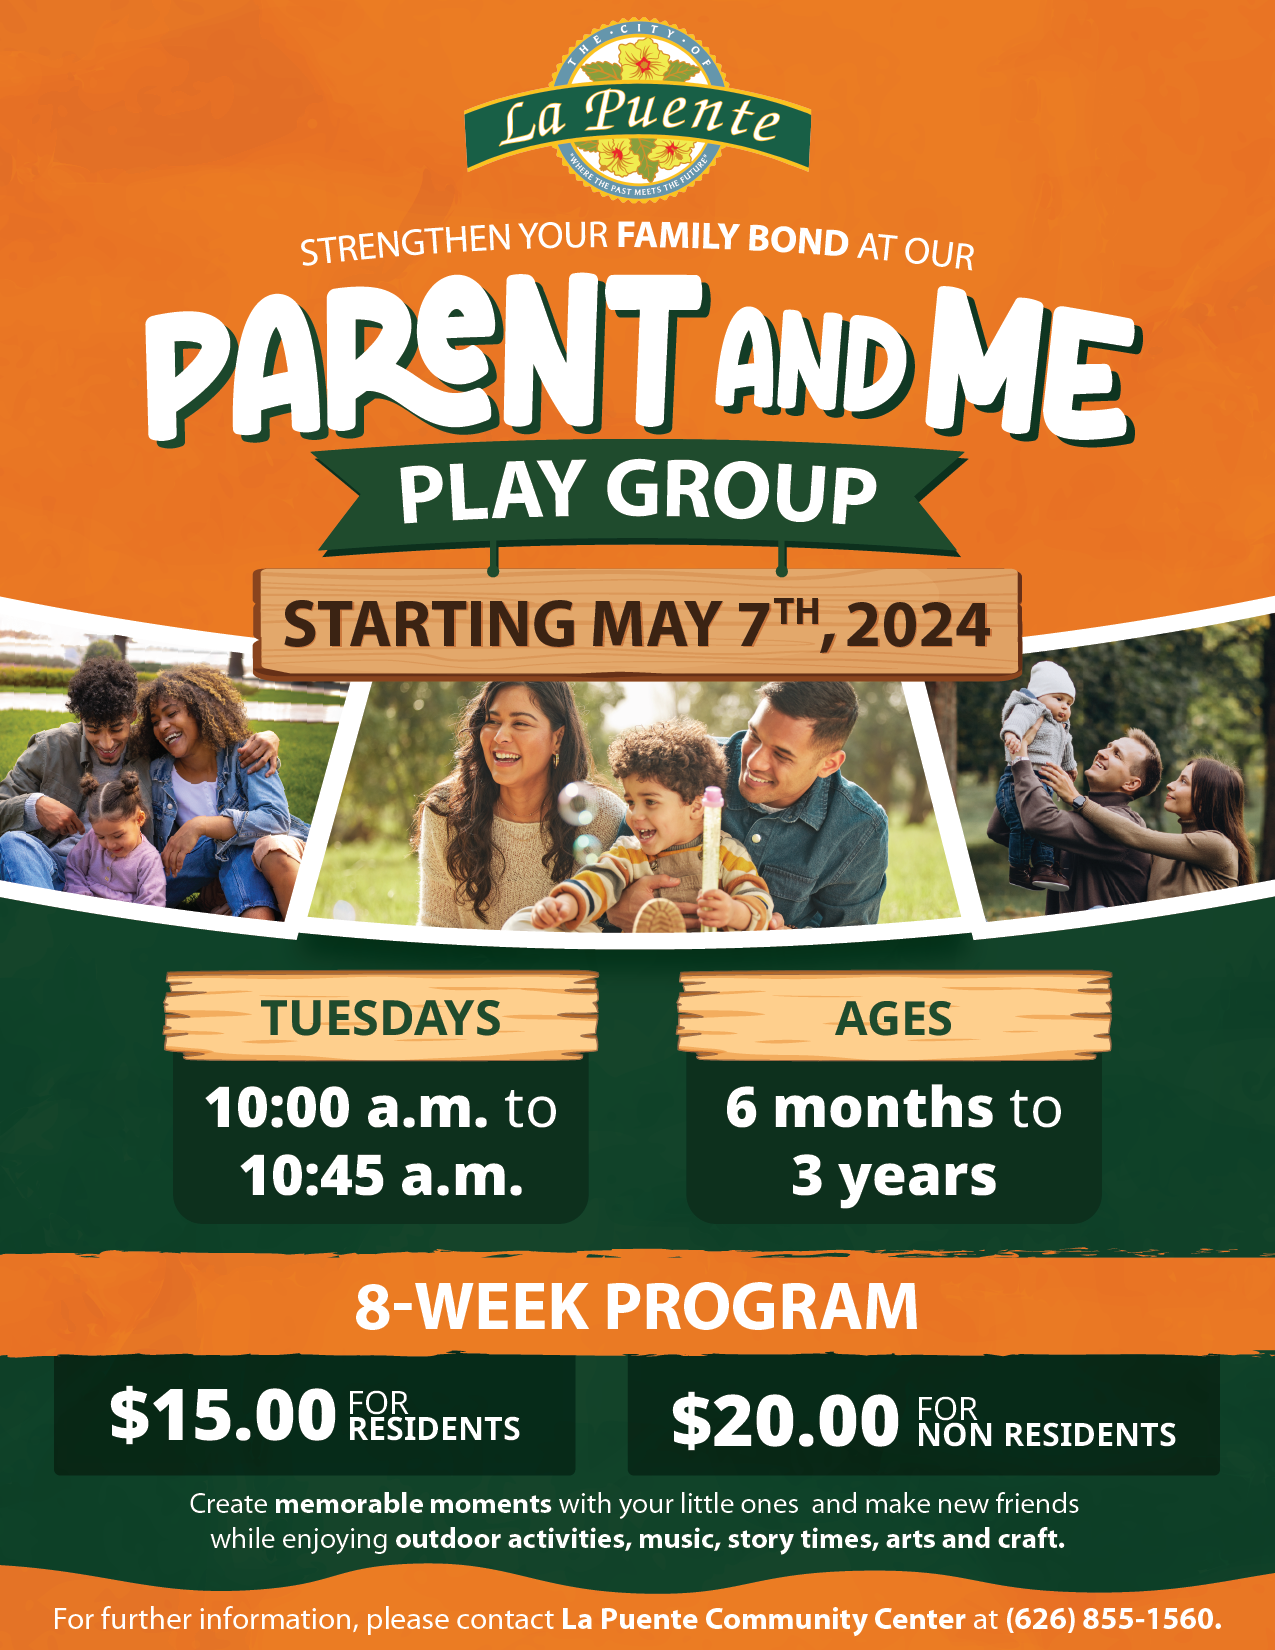 LP_Parent-and-Me-Play-Group_Flyer_04